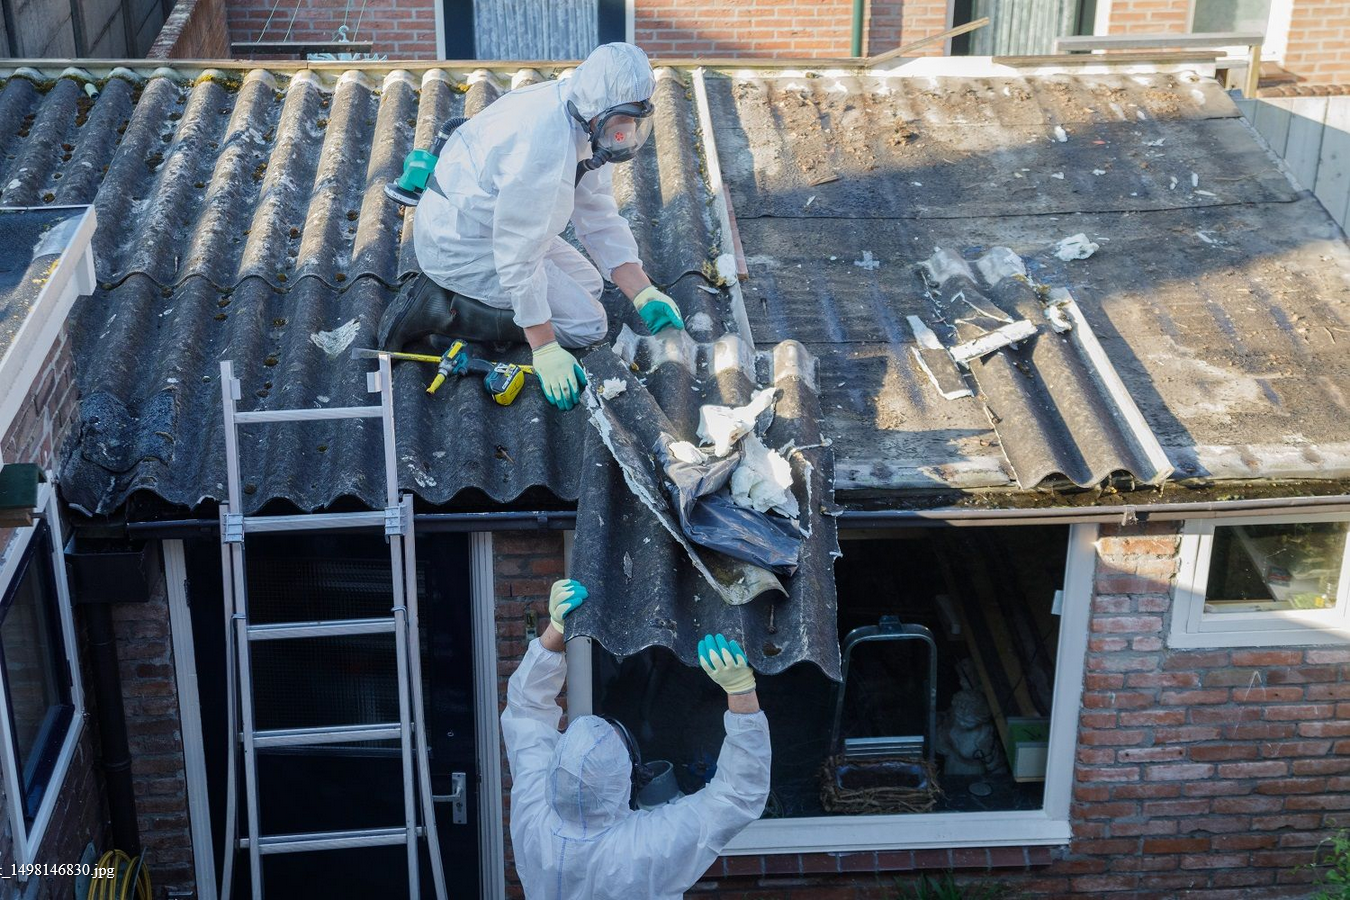 Prompt & Professional Asbestos Solutions